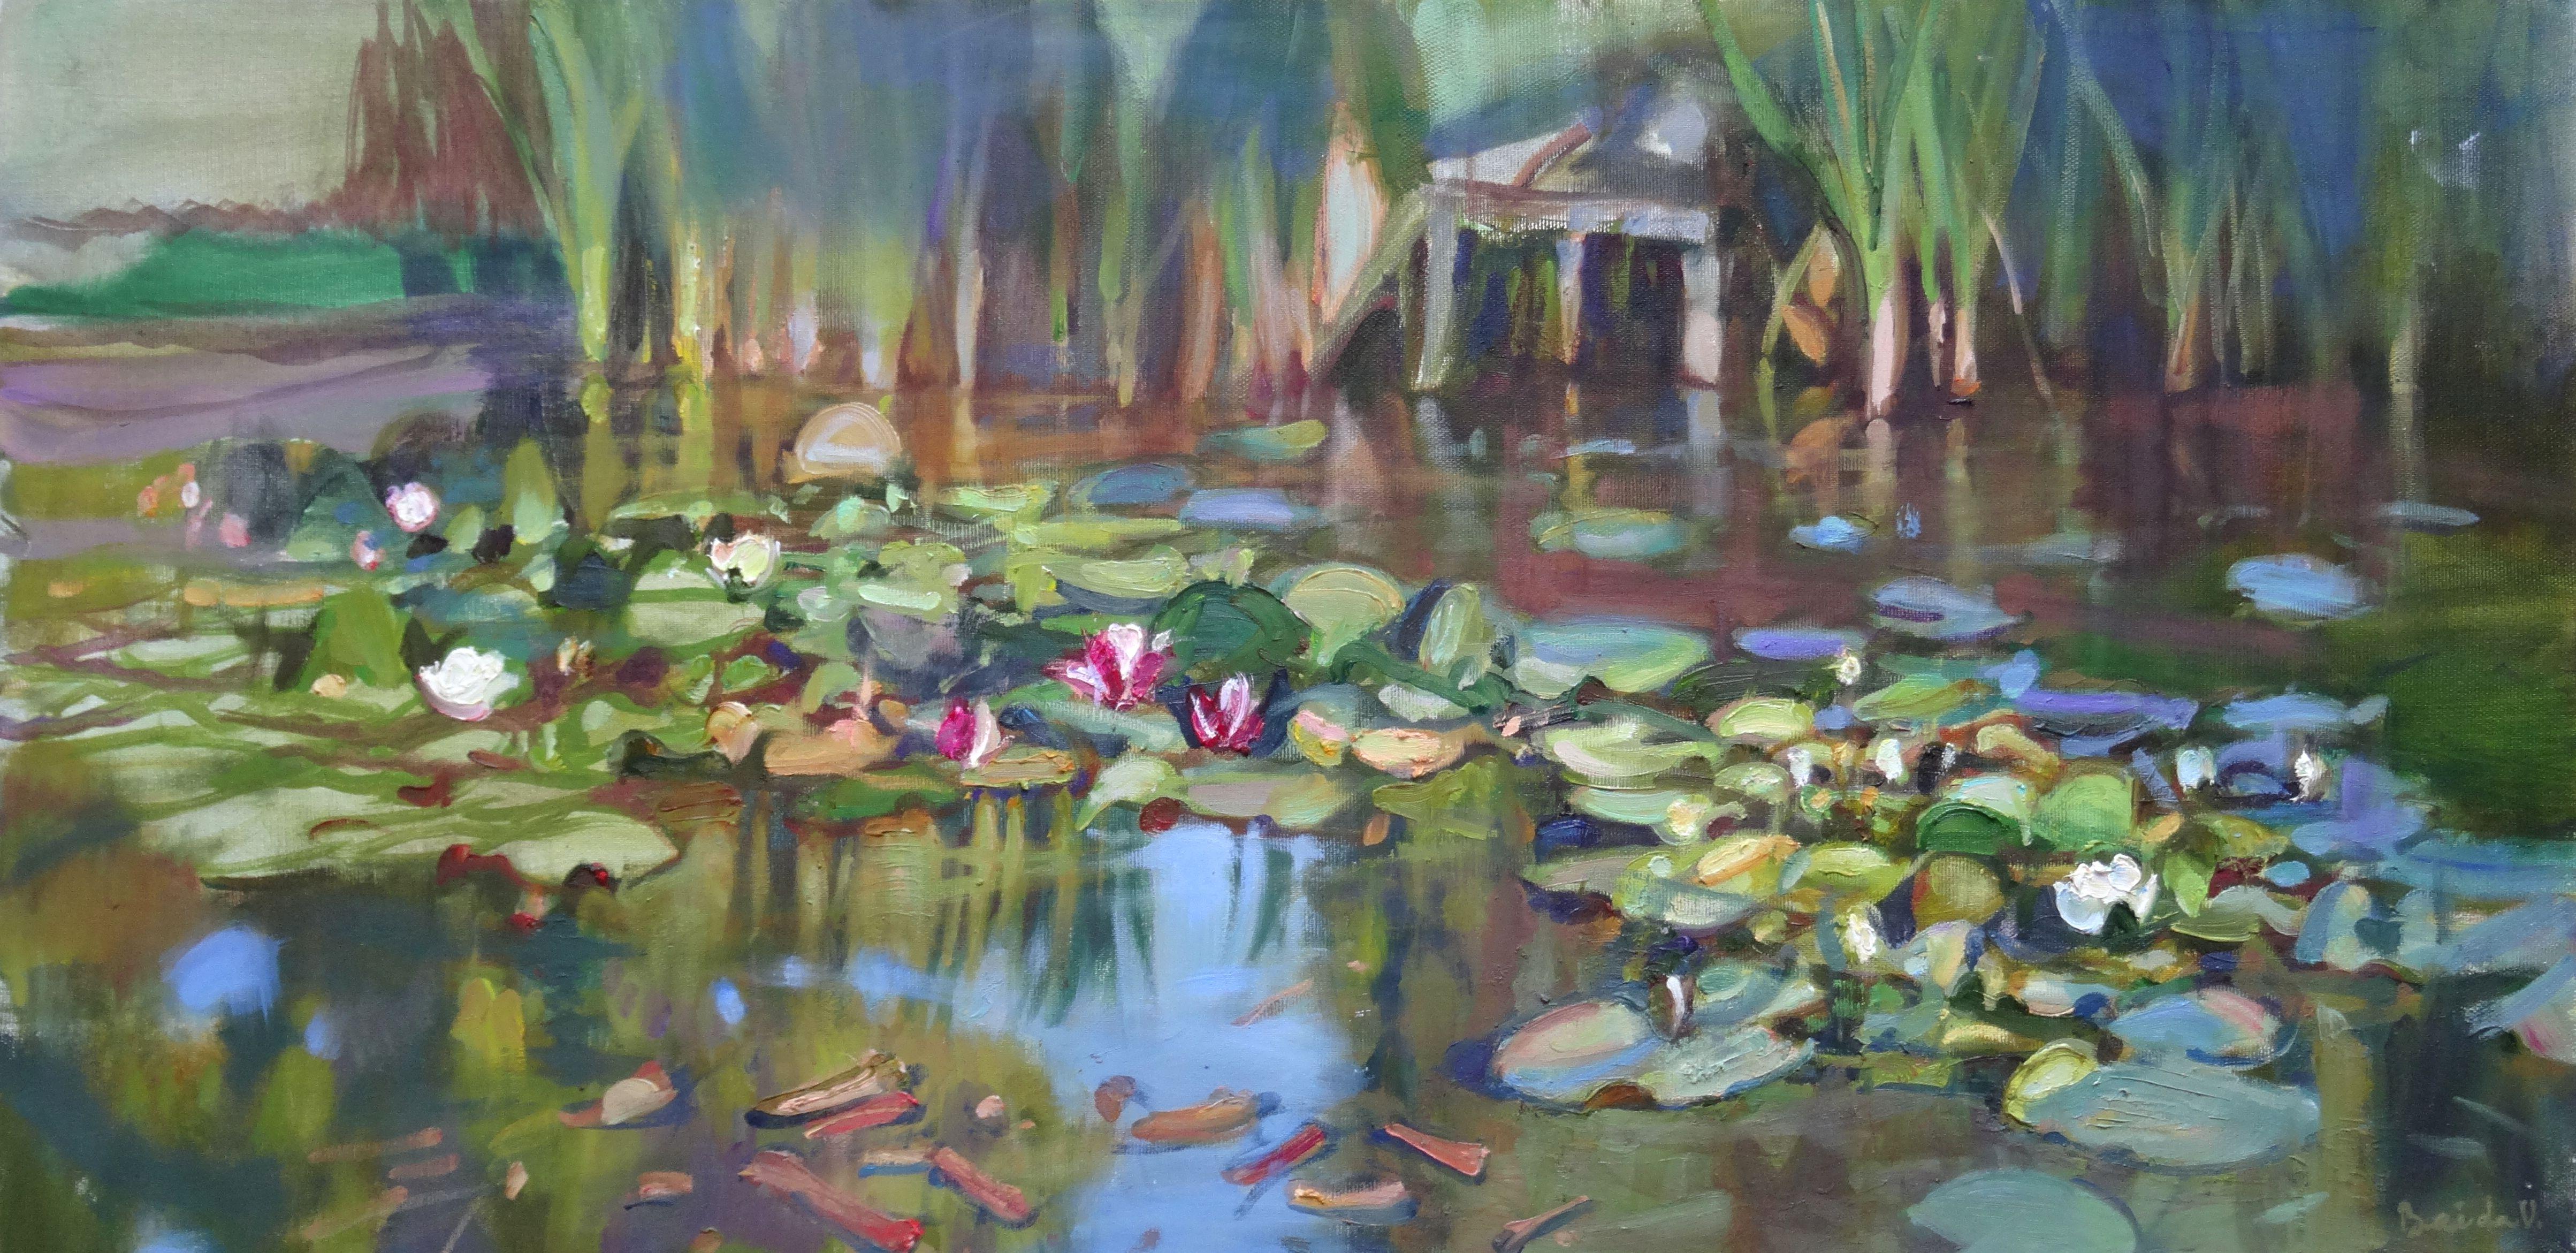 Valery Bayda  Landscape Painting - Water lilies. 2019. Oil on canvas, 40x80 cm